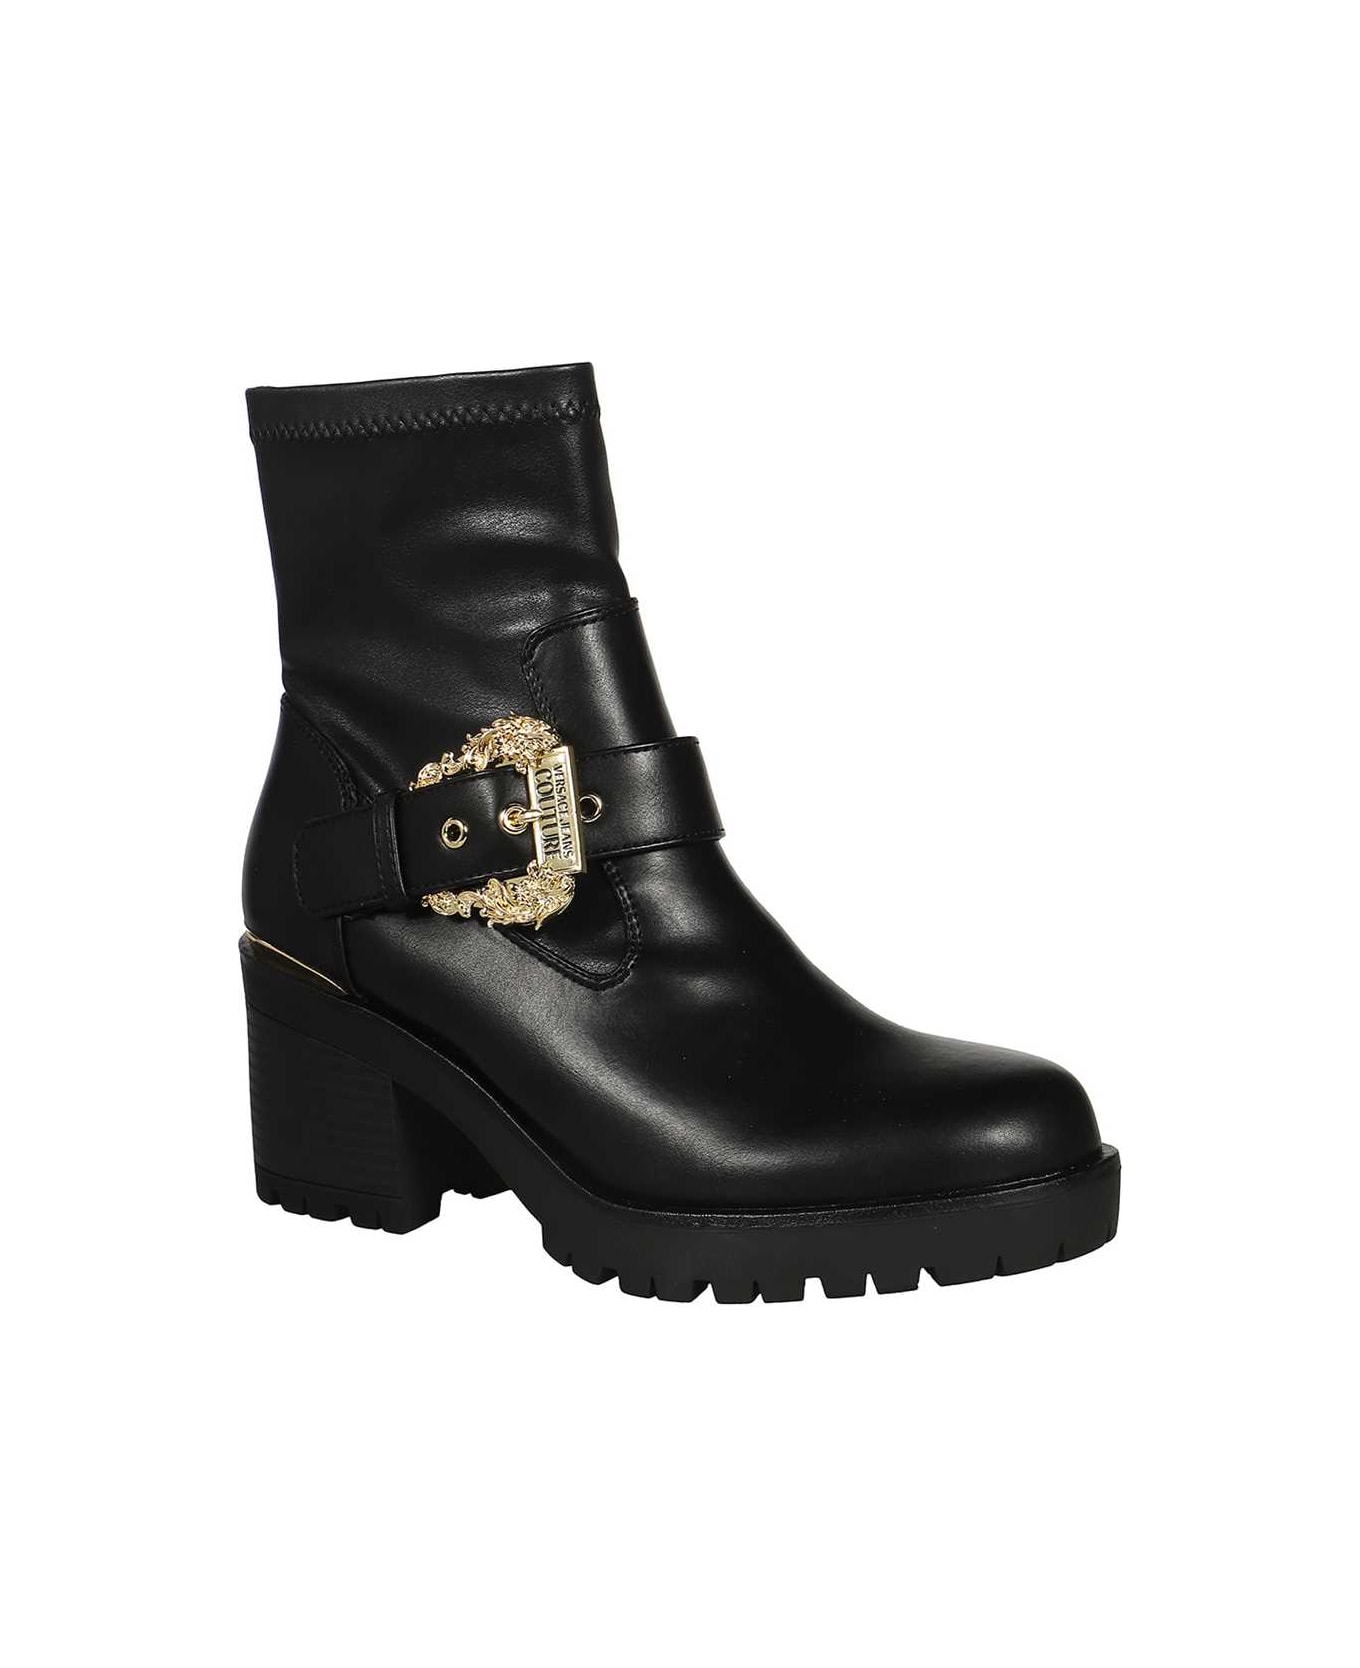 Versace Jeans Couture Wedge Ankle Boots - black ブーツ